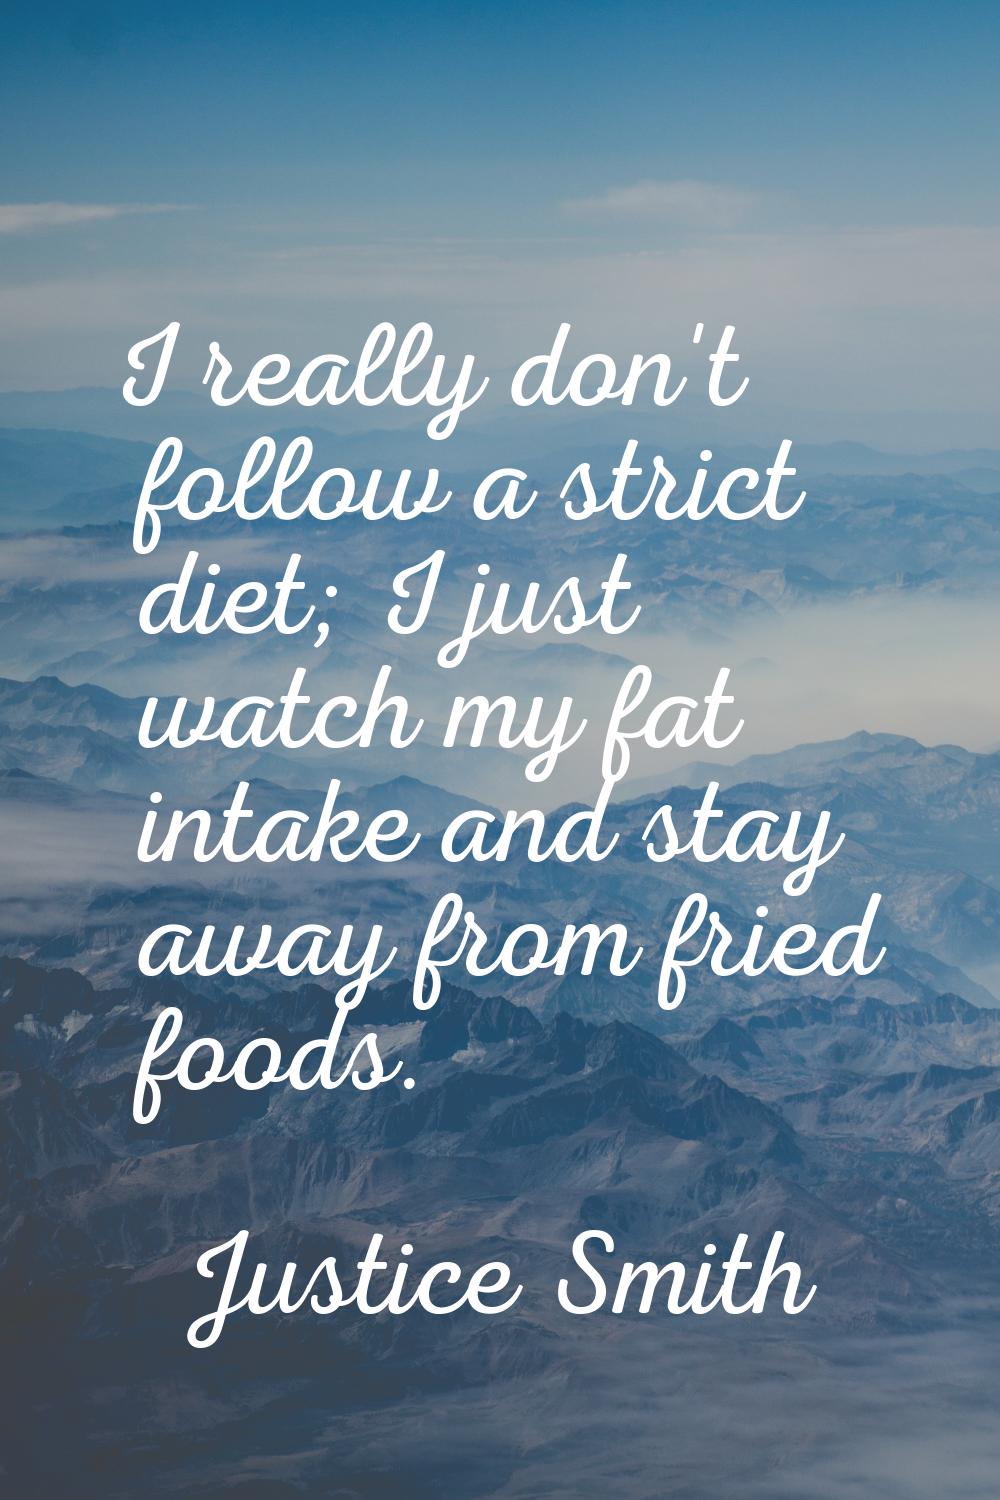 I really don't follow a strict diet; I just watch my fat intake and stay away from fried foods.